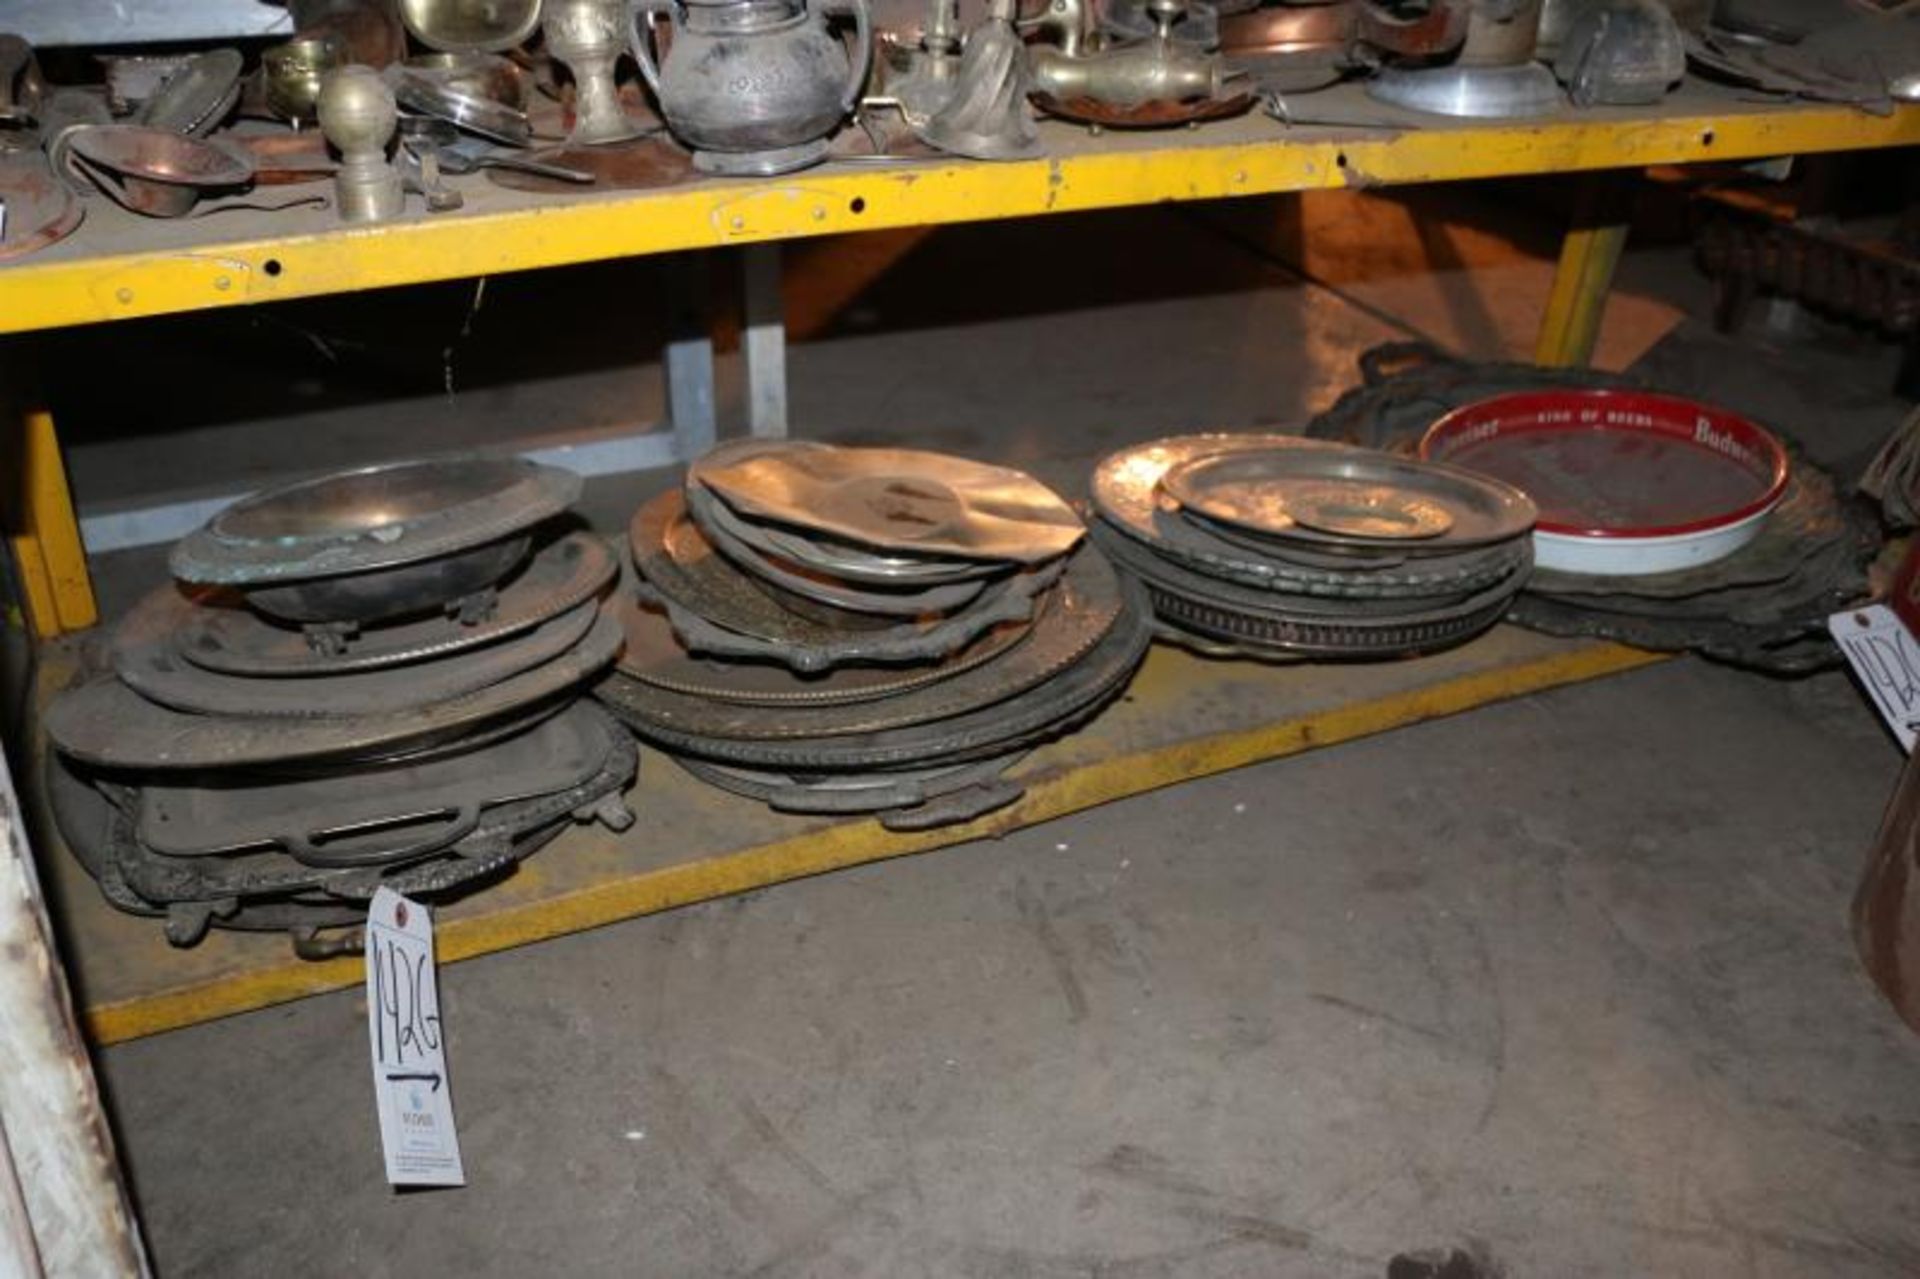 Shelf Full of Assorted Brass and Copper Engraved Art Plates